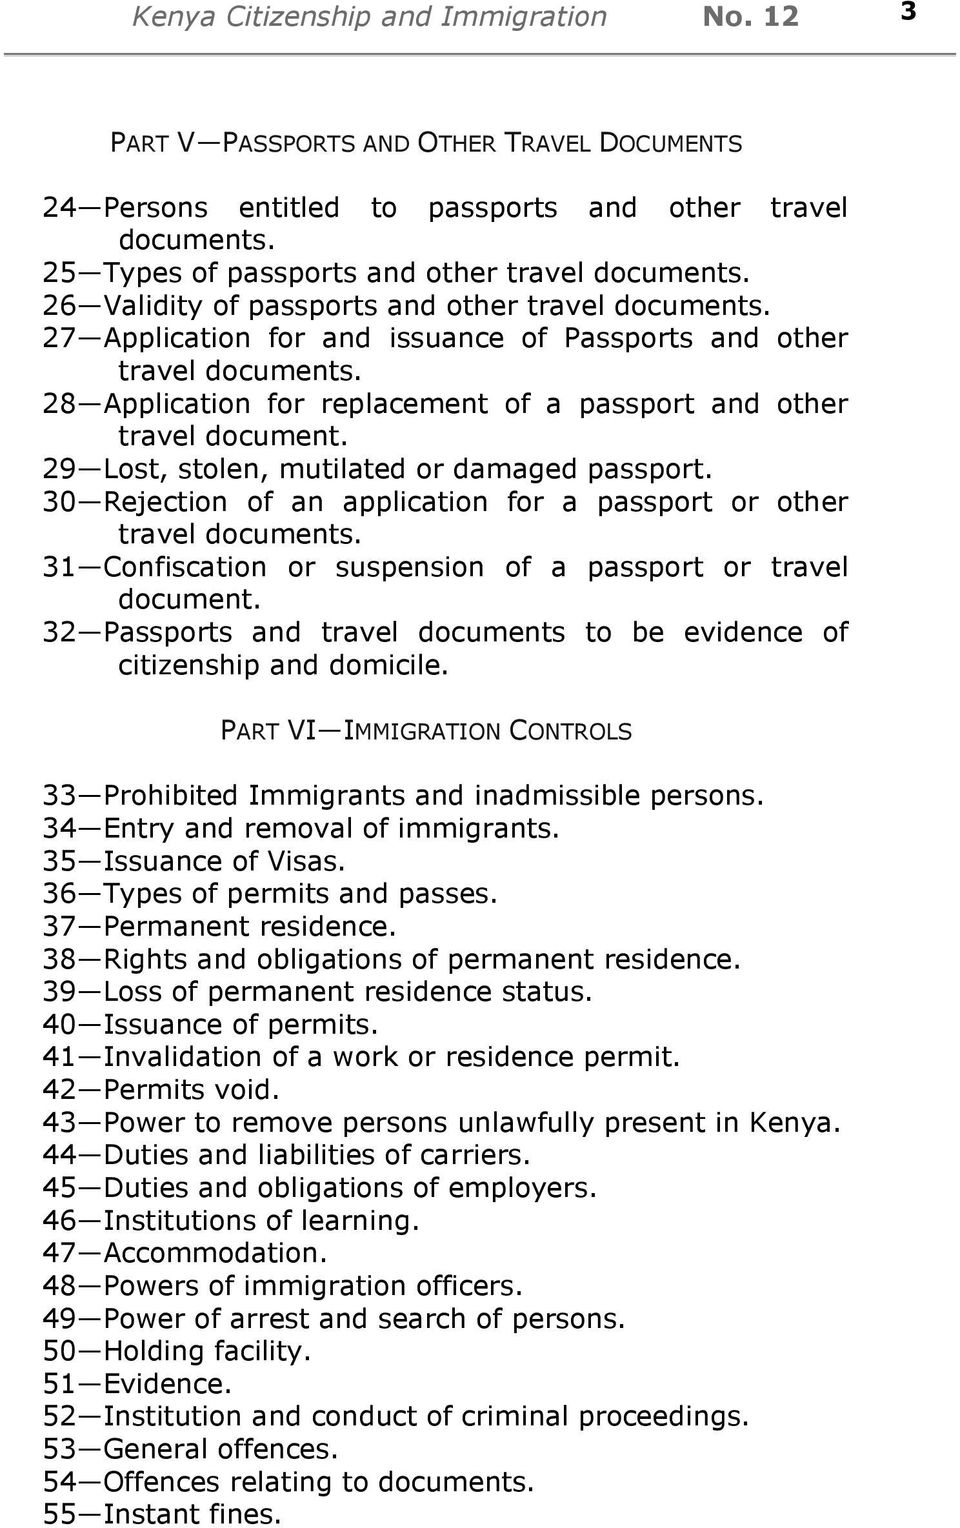 29 Lost, stolen, mutilated or damaged passport. 30 Rejection of an application for a passport or other travel documents. 31 Confiscation or suspension of a passport or travel document.